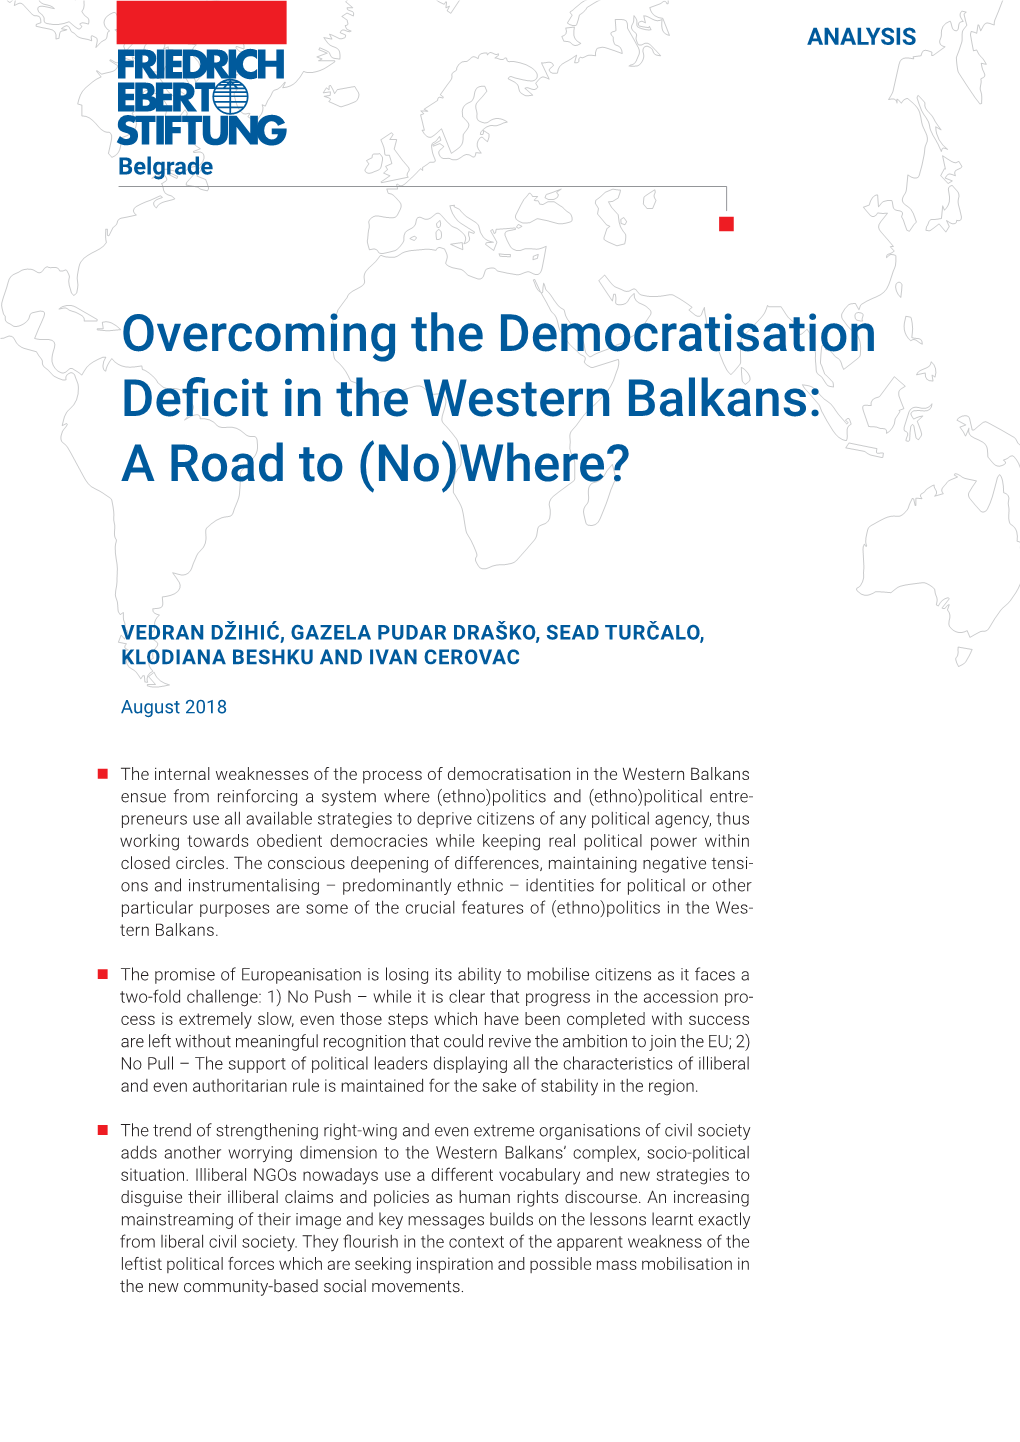 Overcoming the Democratisation Deficit in the Western Balkans: a Road to (No)Where?